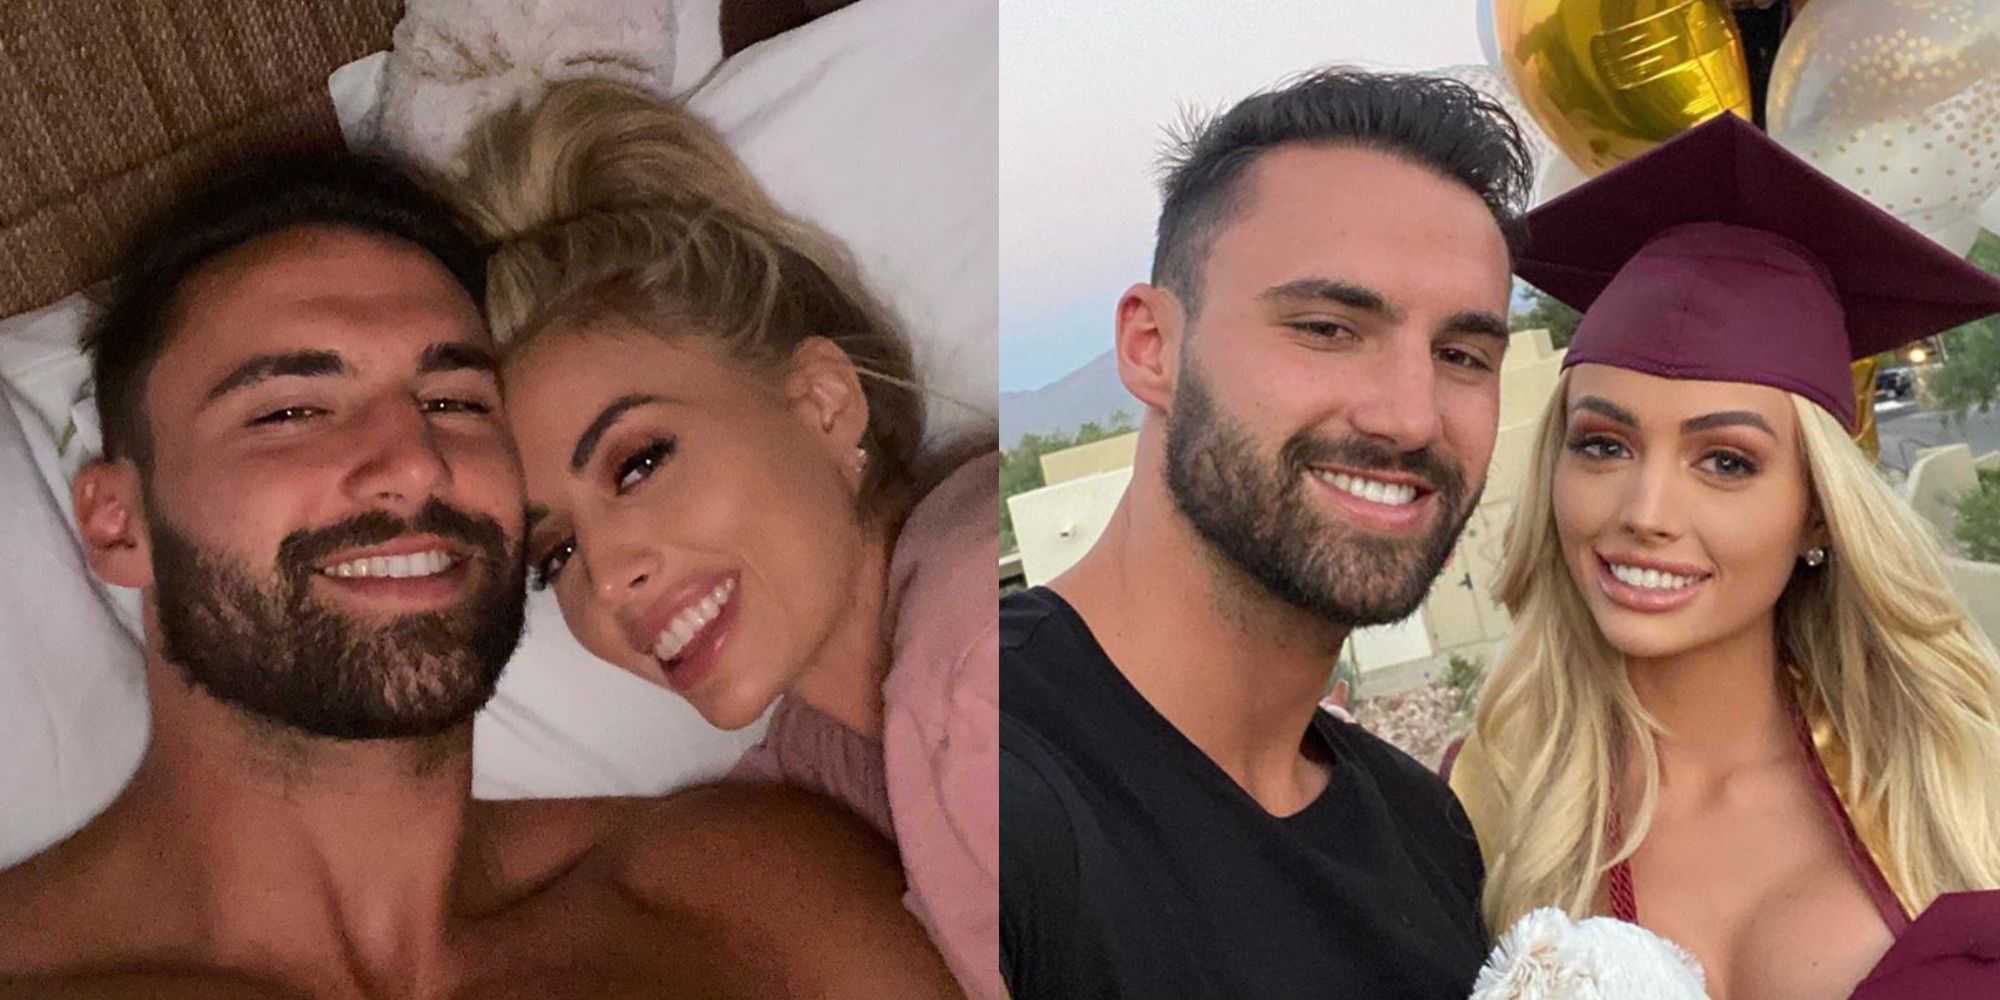 Love Island USA Best Pictures Of Connor & Mackenzie Together After The